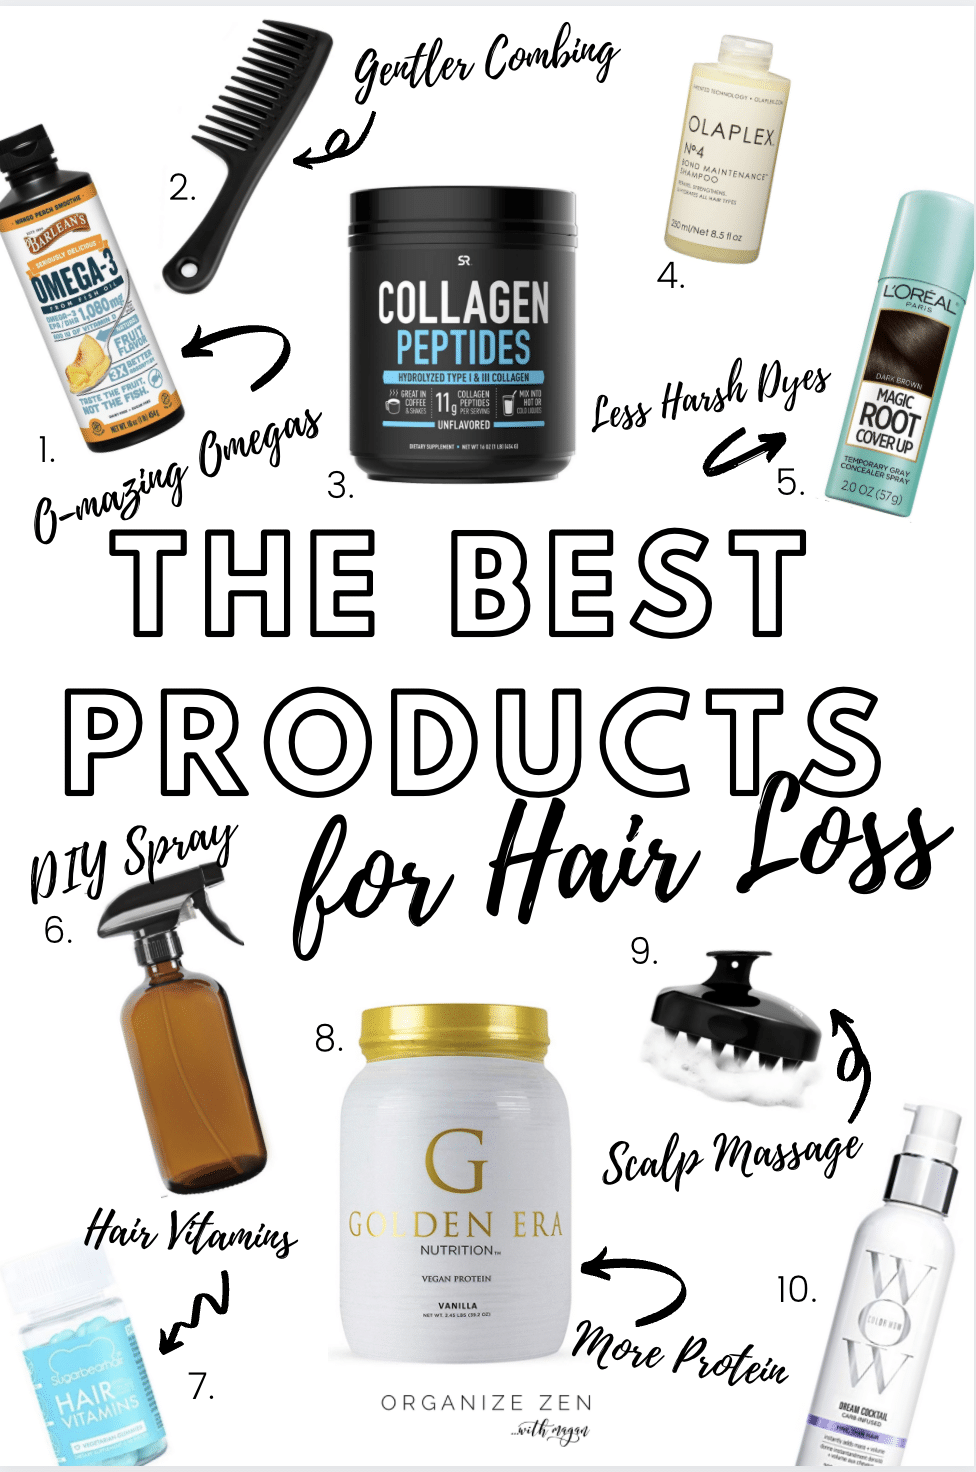 The Best 10 Products for Hair Loss